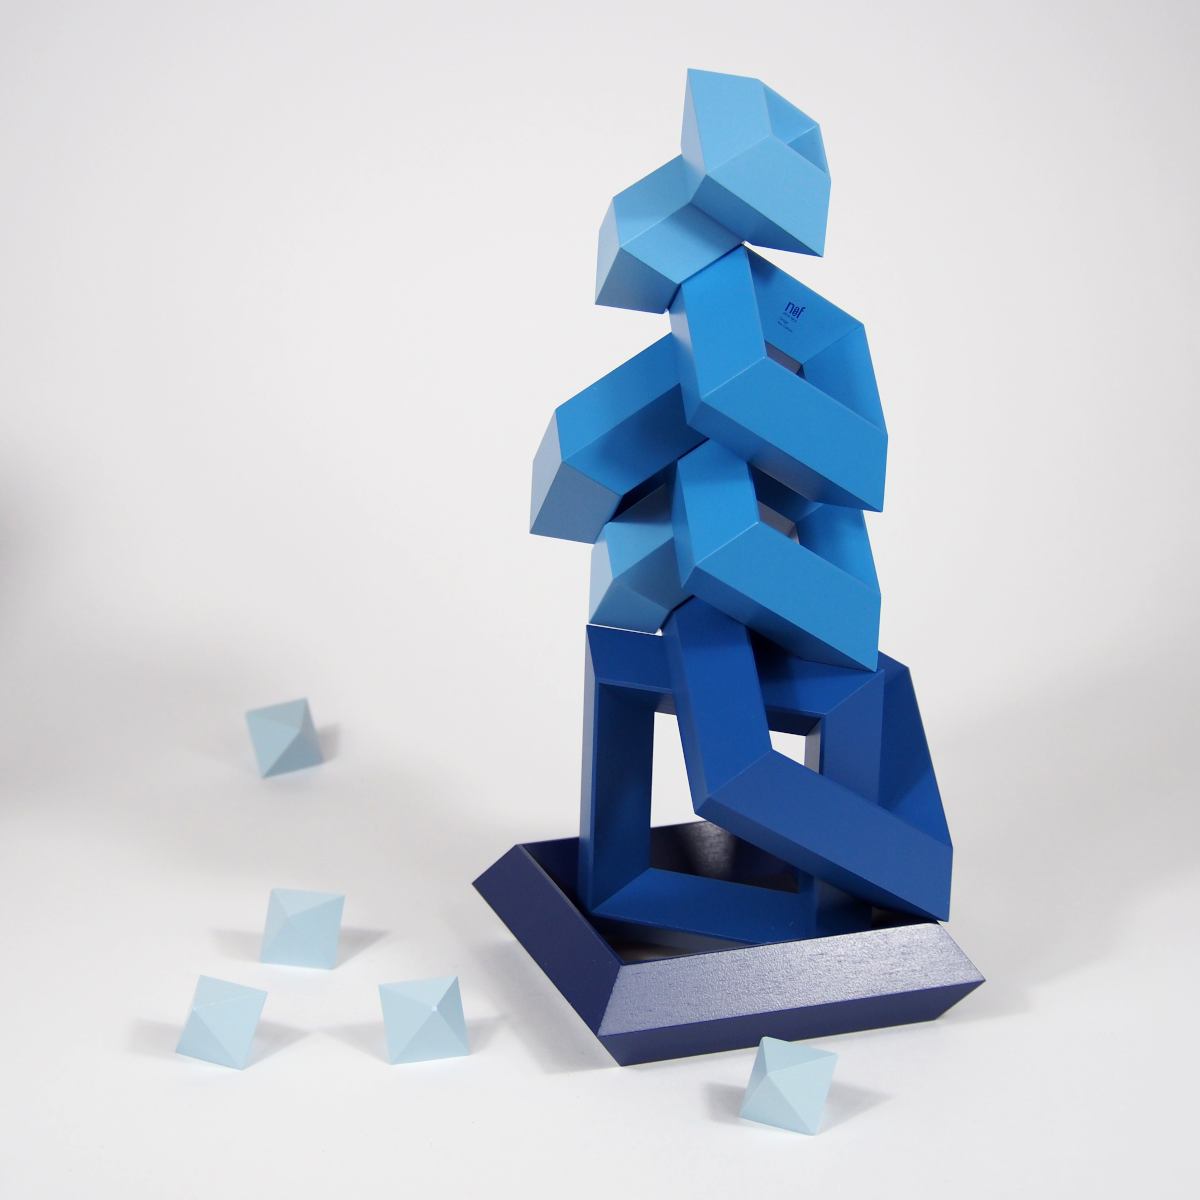 Diamant (Blue) – Original Construction Game by Naef, made of Wood